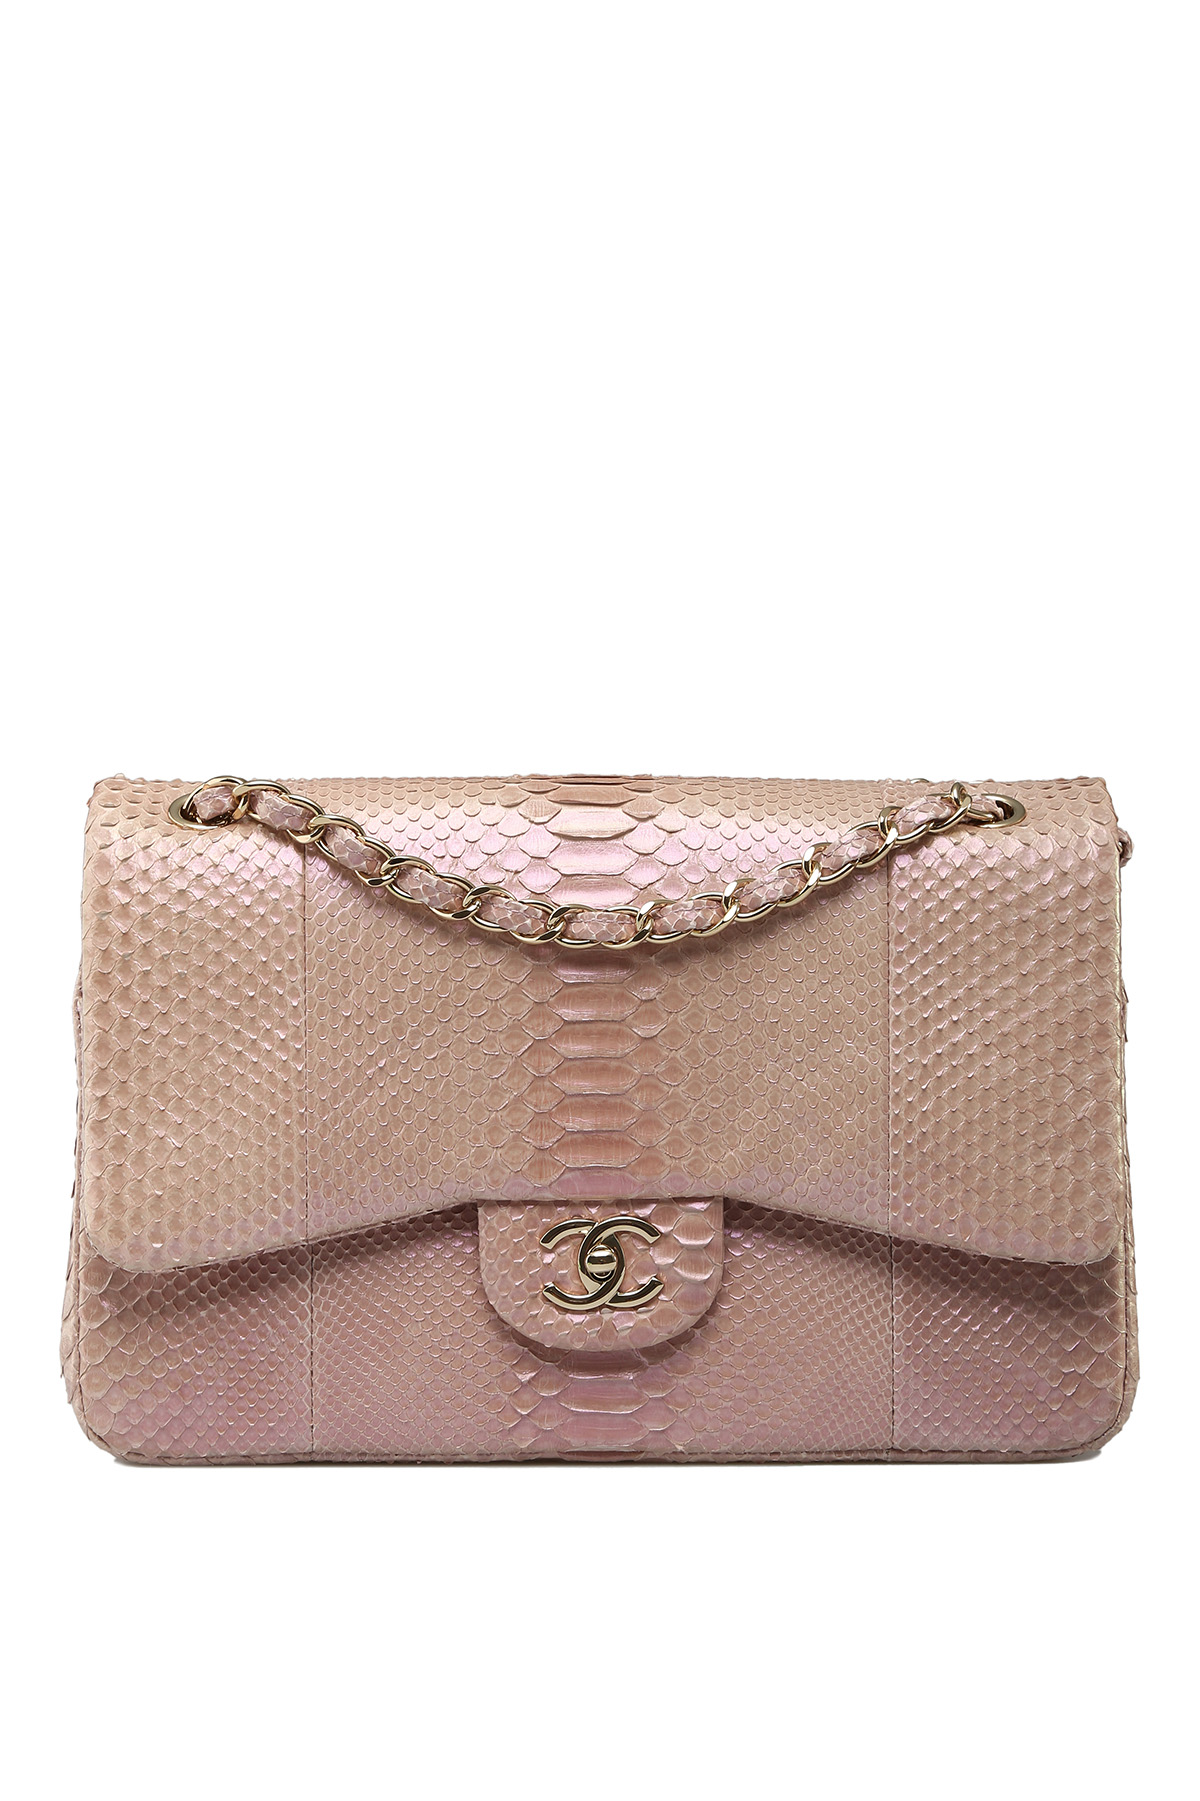 Chanel Jumbo Double Flap Bag in Light Pink Python with Gold-Tone Metal  Hardware